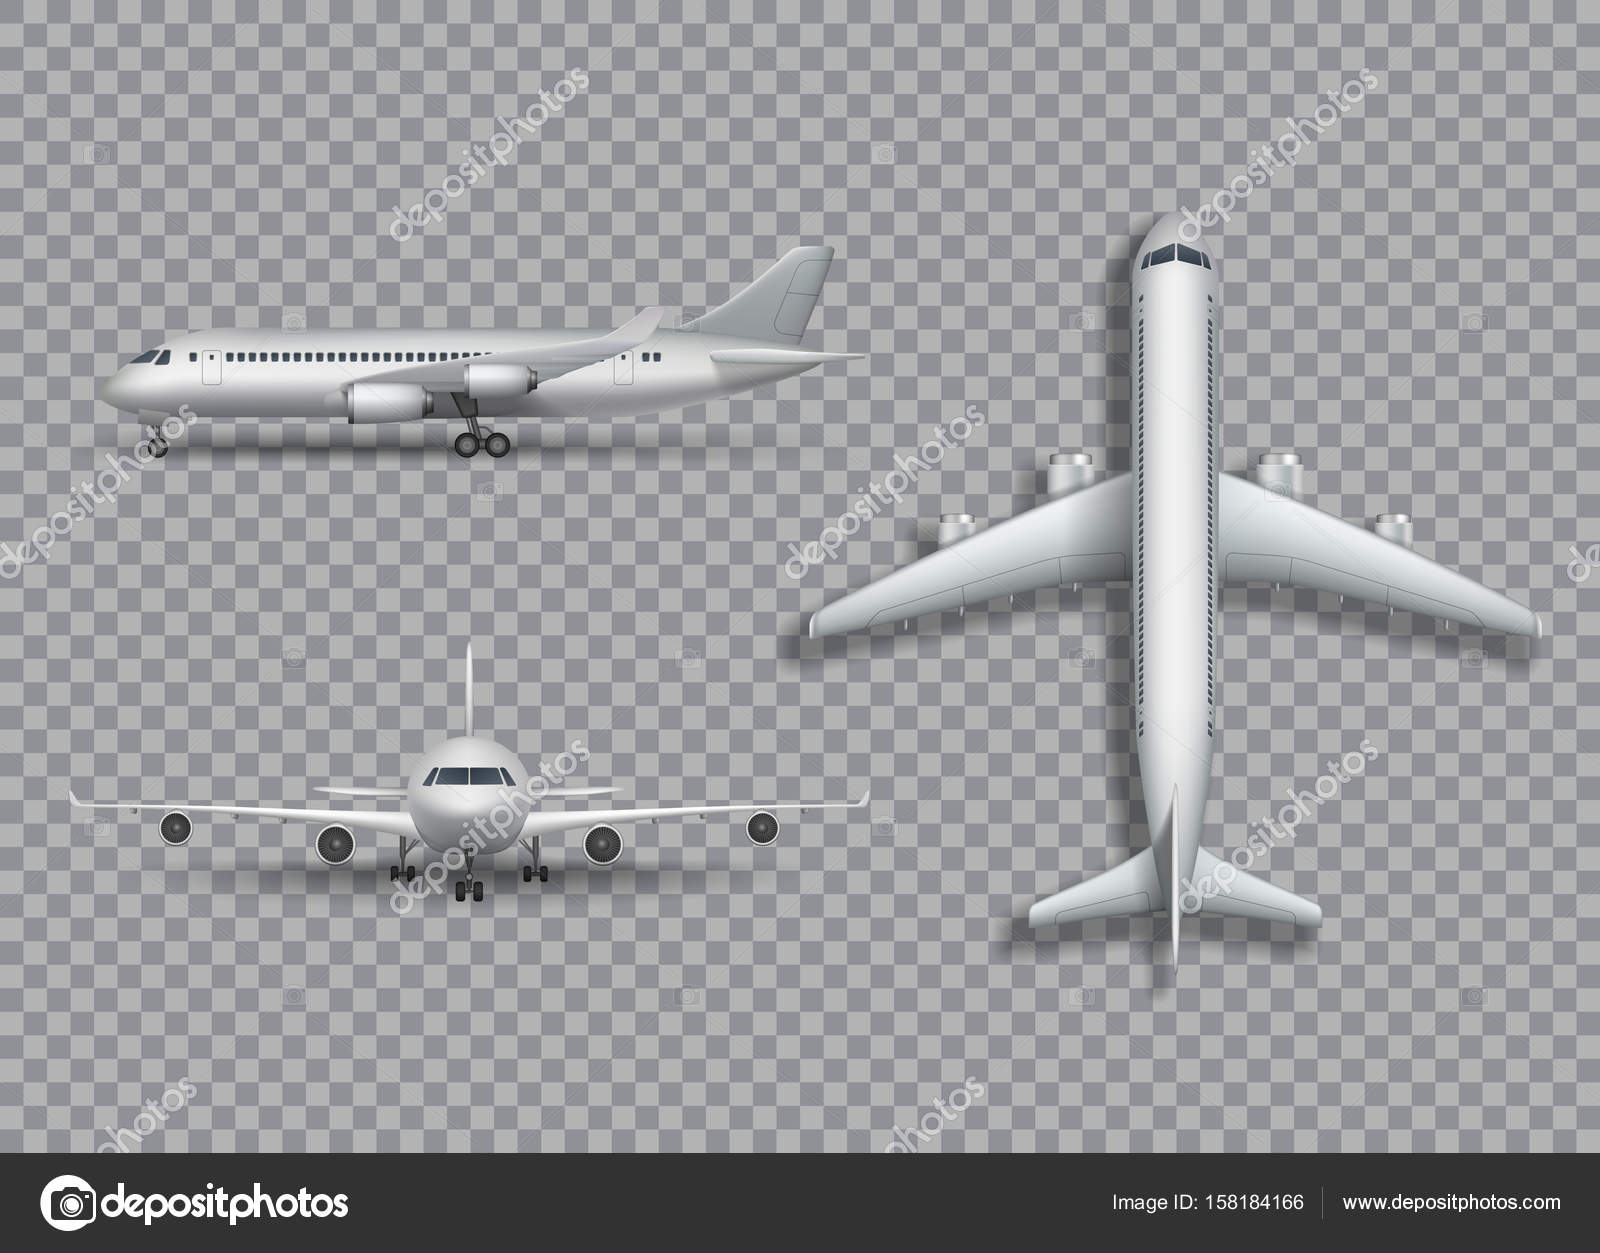 Download White Airplane Mock Up Isolated Aircraft Airliner Realistic 3d Illustration On Transtarent Background Set Of Air Plane From Front Side And Top View Vector Illustration Vector Image By C Sergey 85